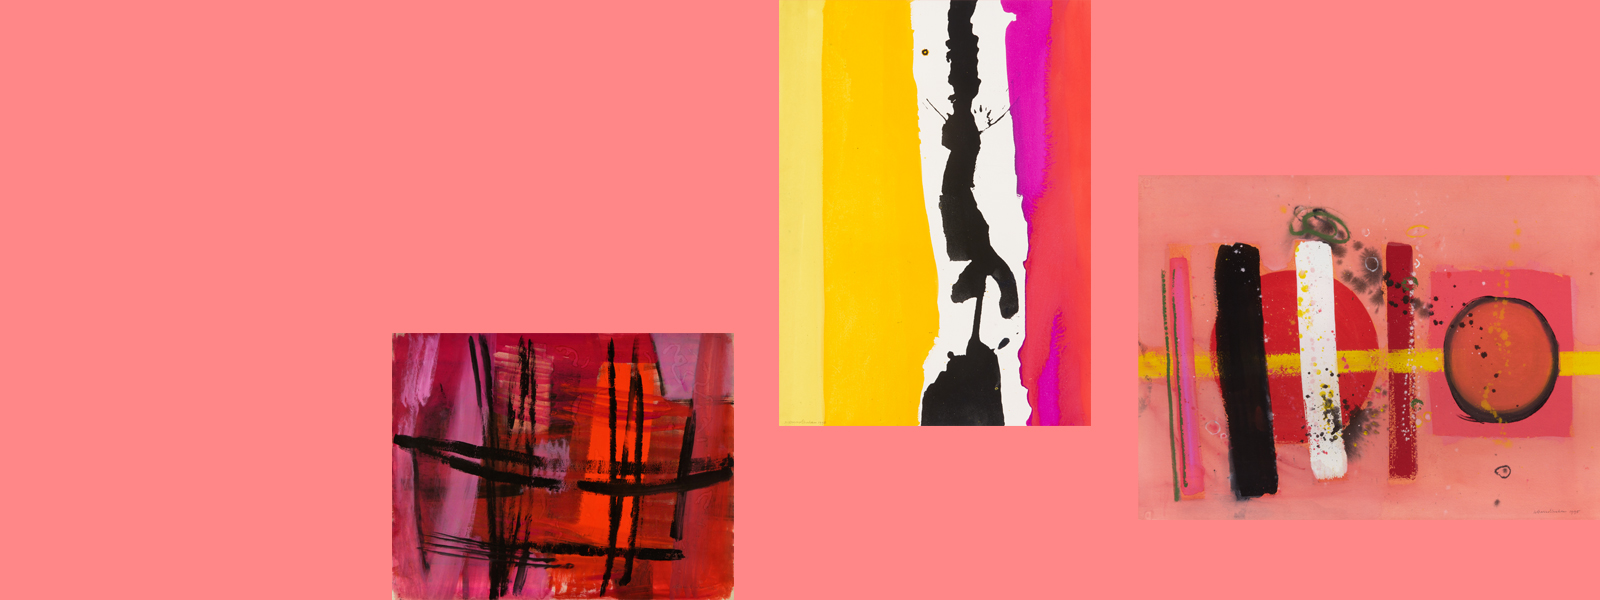 Three abstract works of art on a salmon background. From left to right: a pink and red abstract composition with loose black grid; a vertical abstract composition of paint drips in yellows, black, pink and red; an abstract composition of vertical brushstokes in pinks, black, white and red with pink circles and horizontal yellow brushstroke on salmon background